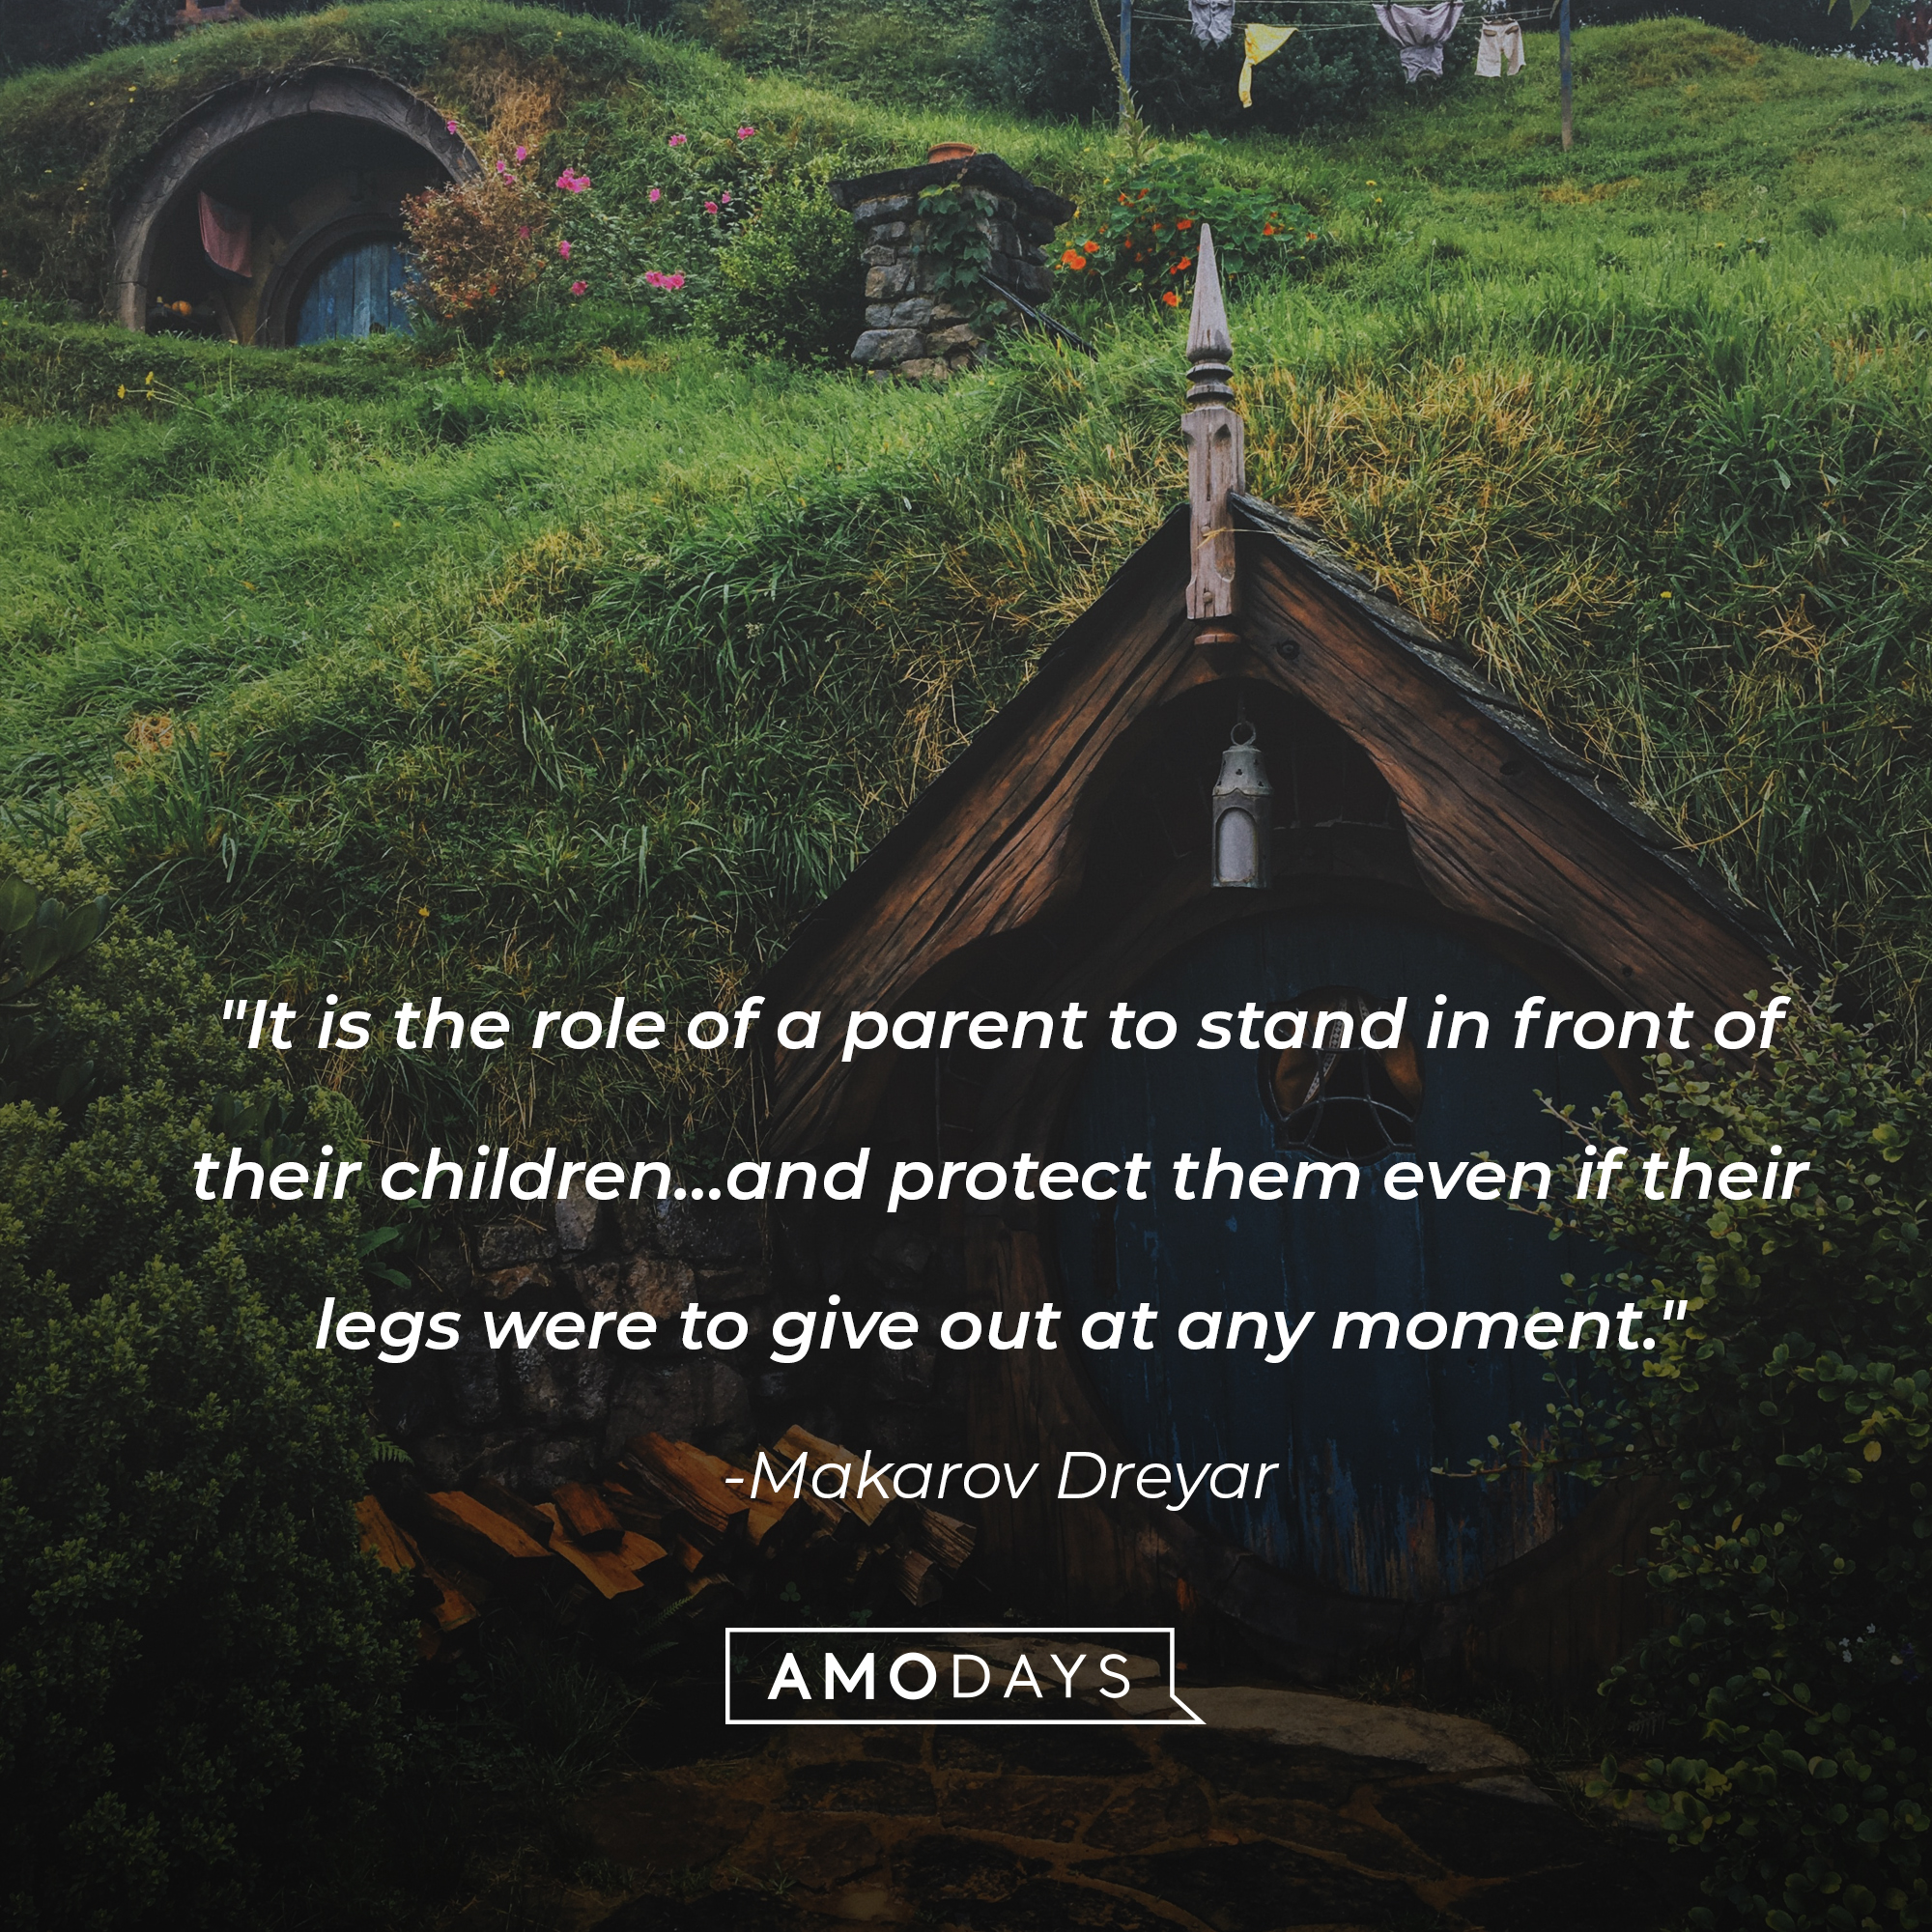 Makarov Dreyar's quote: "It is the role of a parent to stand in front of their children… and protect them even if their legs were to give out at any moment." | Image: Unsplash